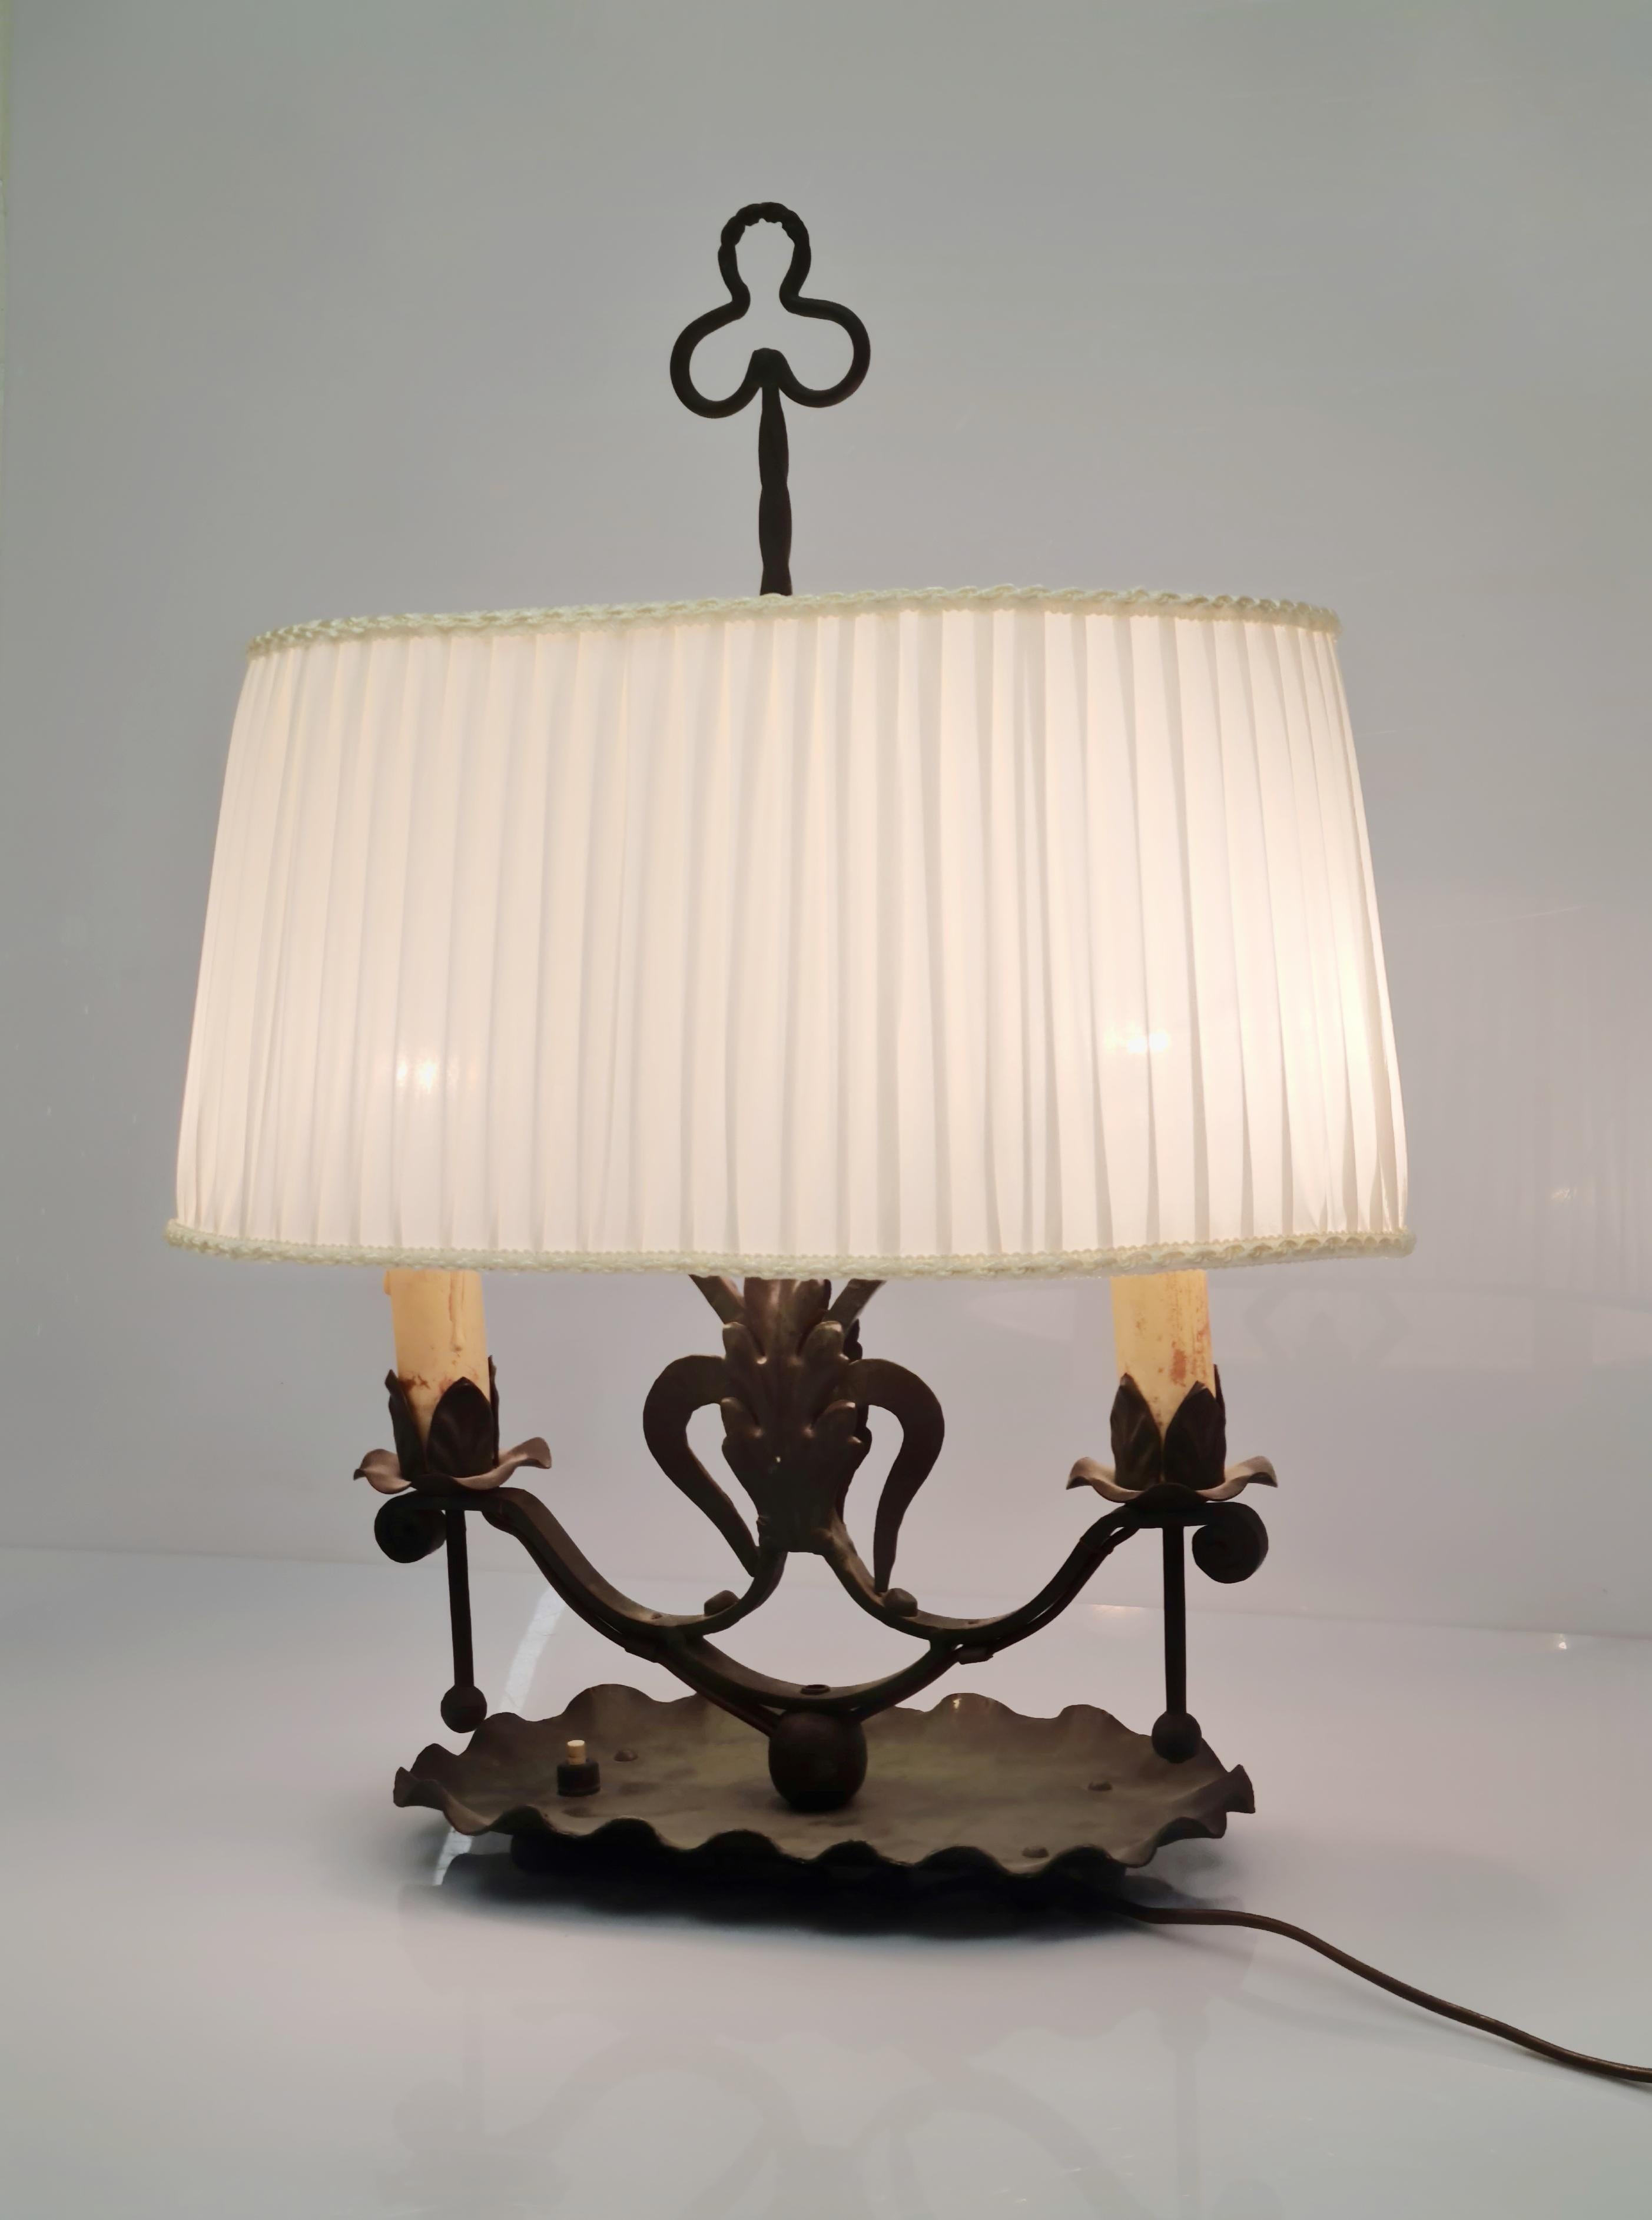 A beautiful table lamp made from wrought iron, designed by Antti Hakkaraien, and manufactured by his company Taidetakomo A. Hakkarainen in the 1930s.
The table lamp is in great condition with a browinsh/greenish patina. The lamp shade has been of